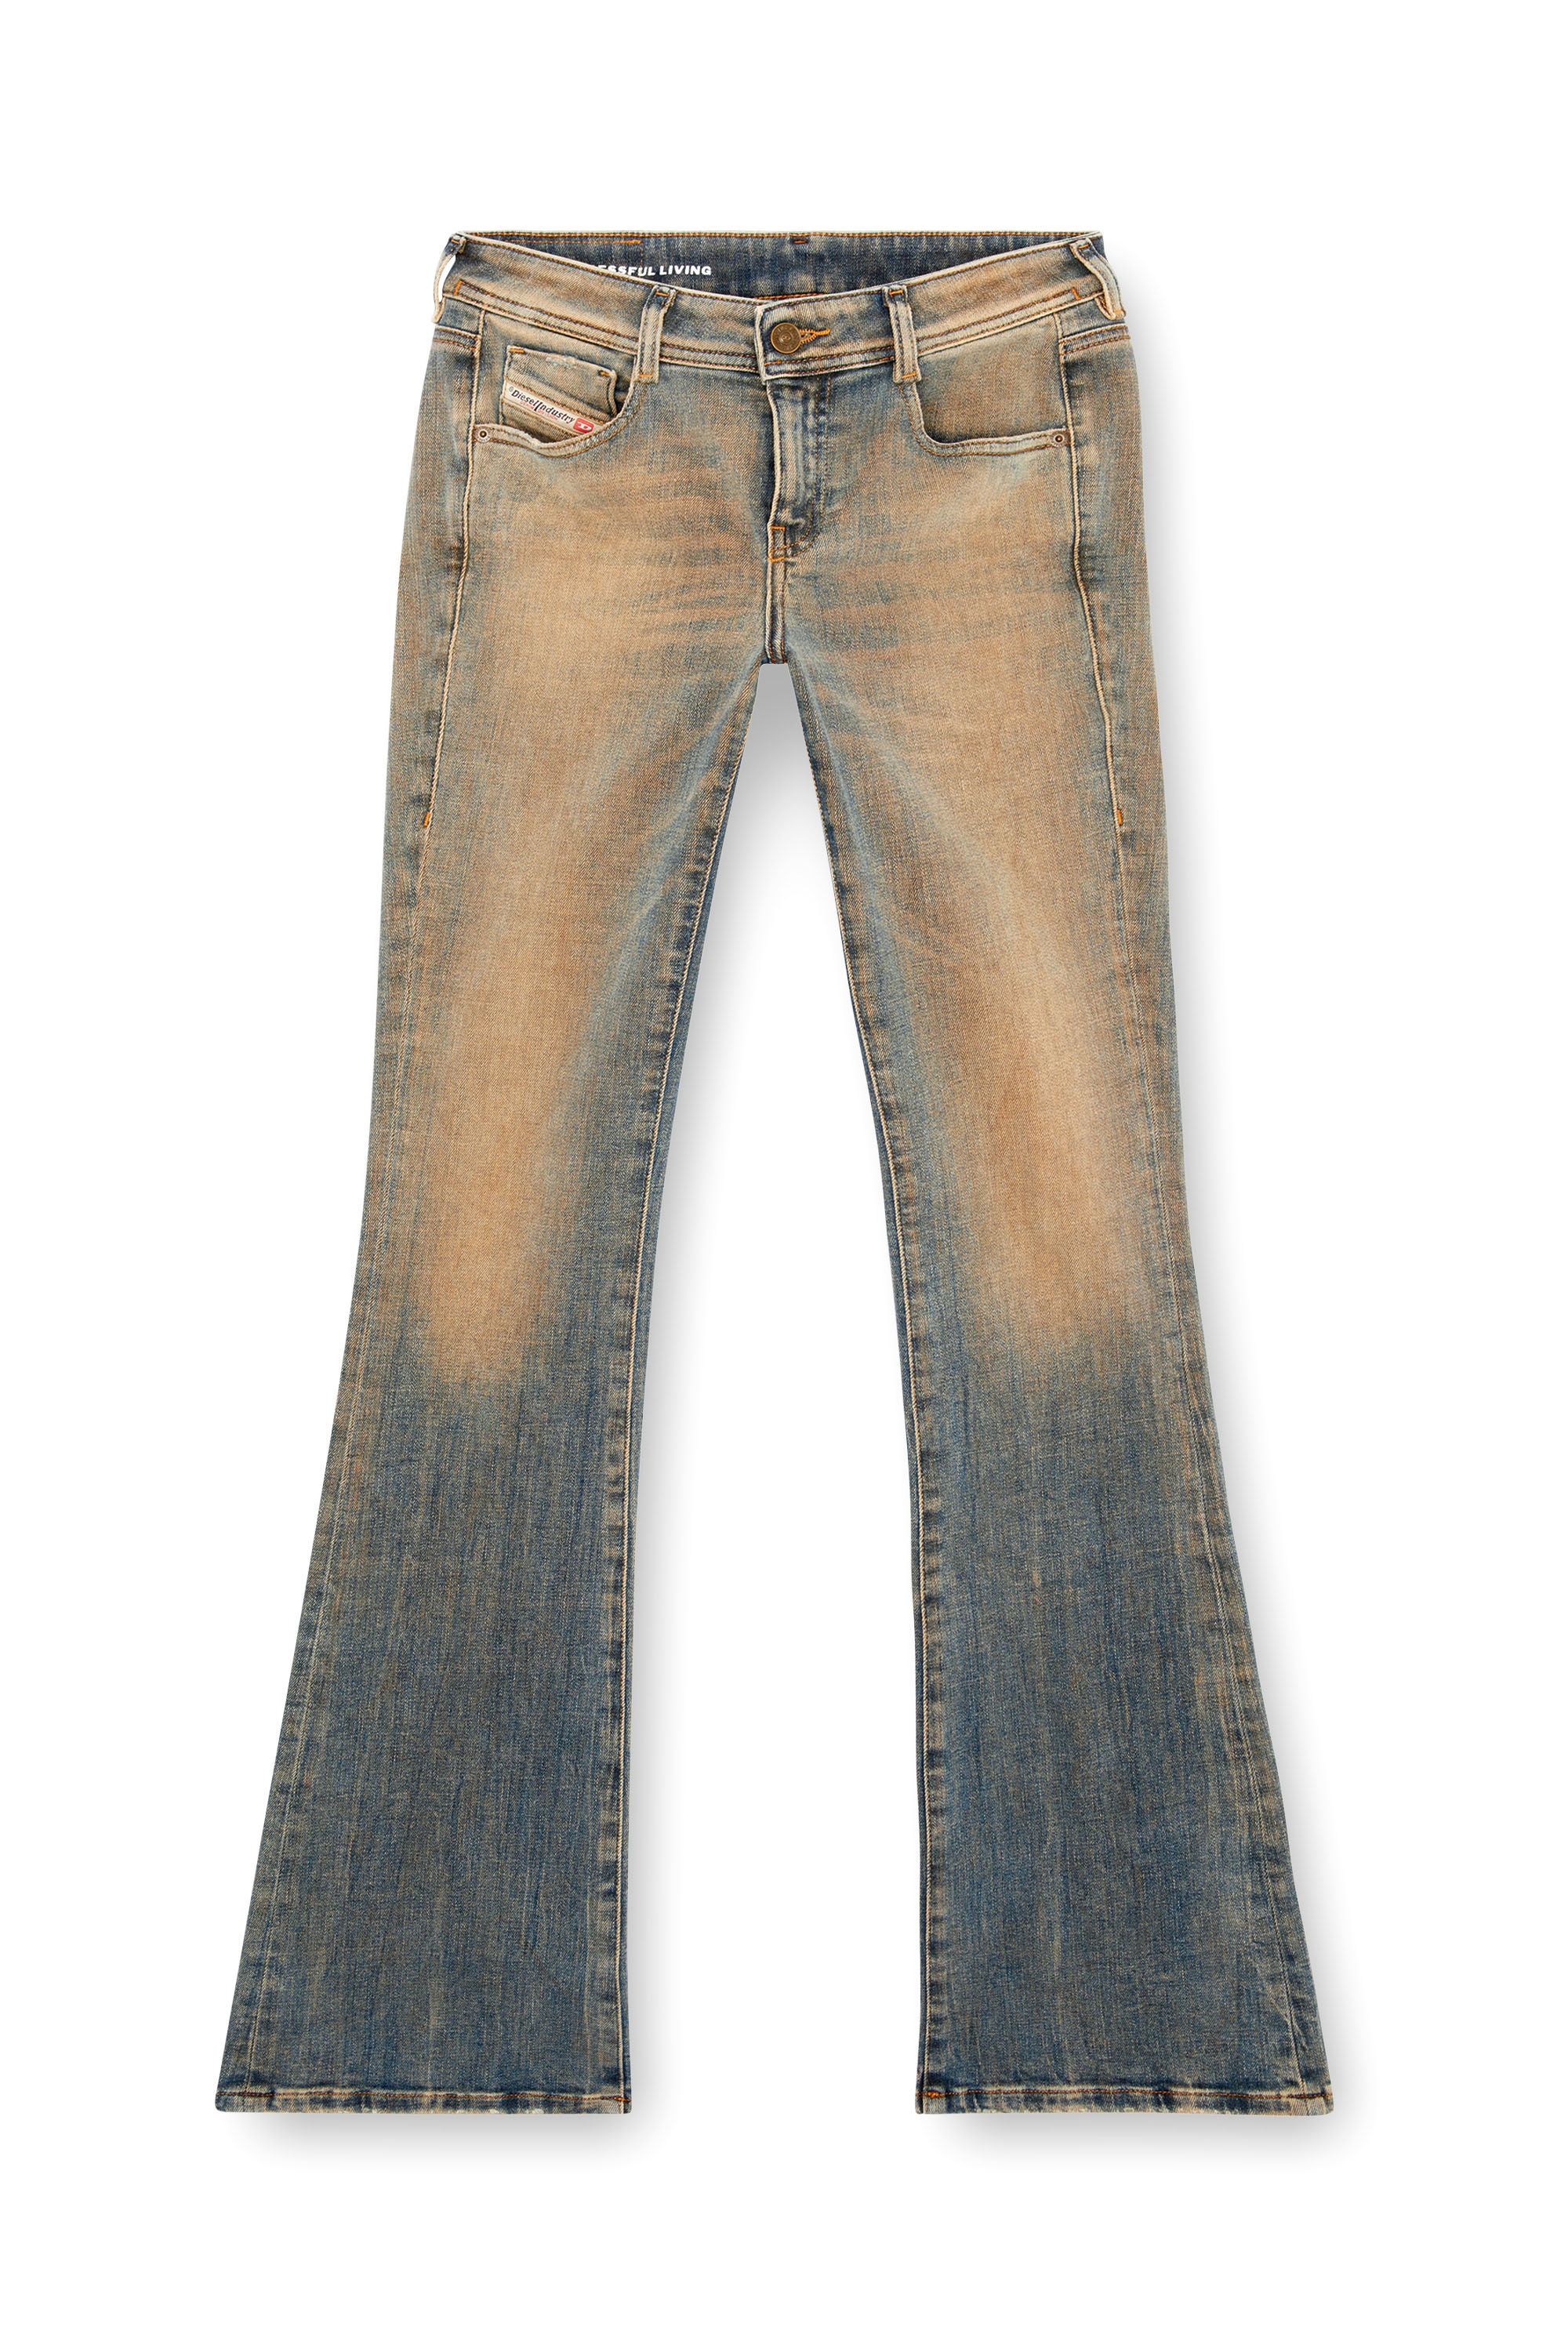 Diesel - Bootcut and Flare Jeans 1969 D-Ebbey 09J23, Mujer Bootcut y Flare Jeans - 1969 D-Ebbey in Azul marino - Image 5